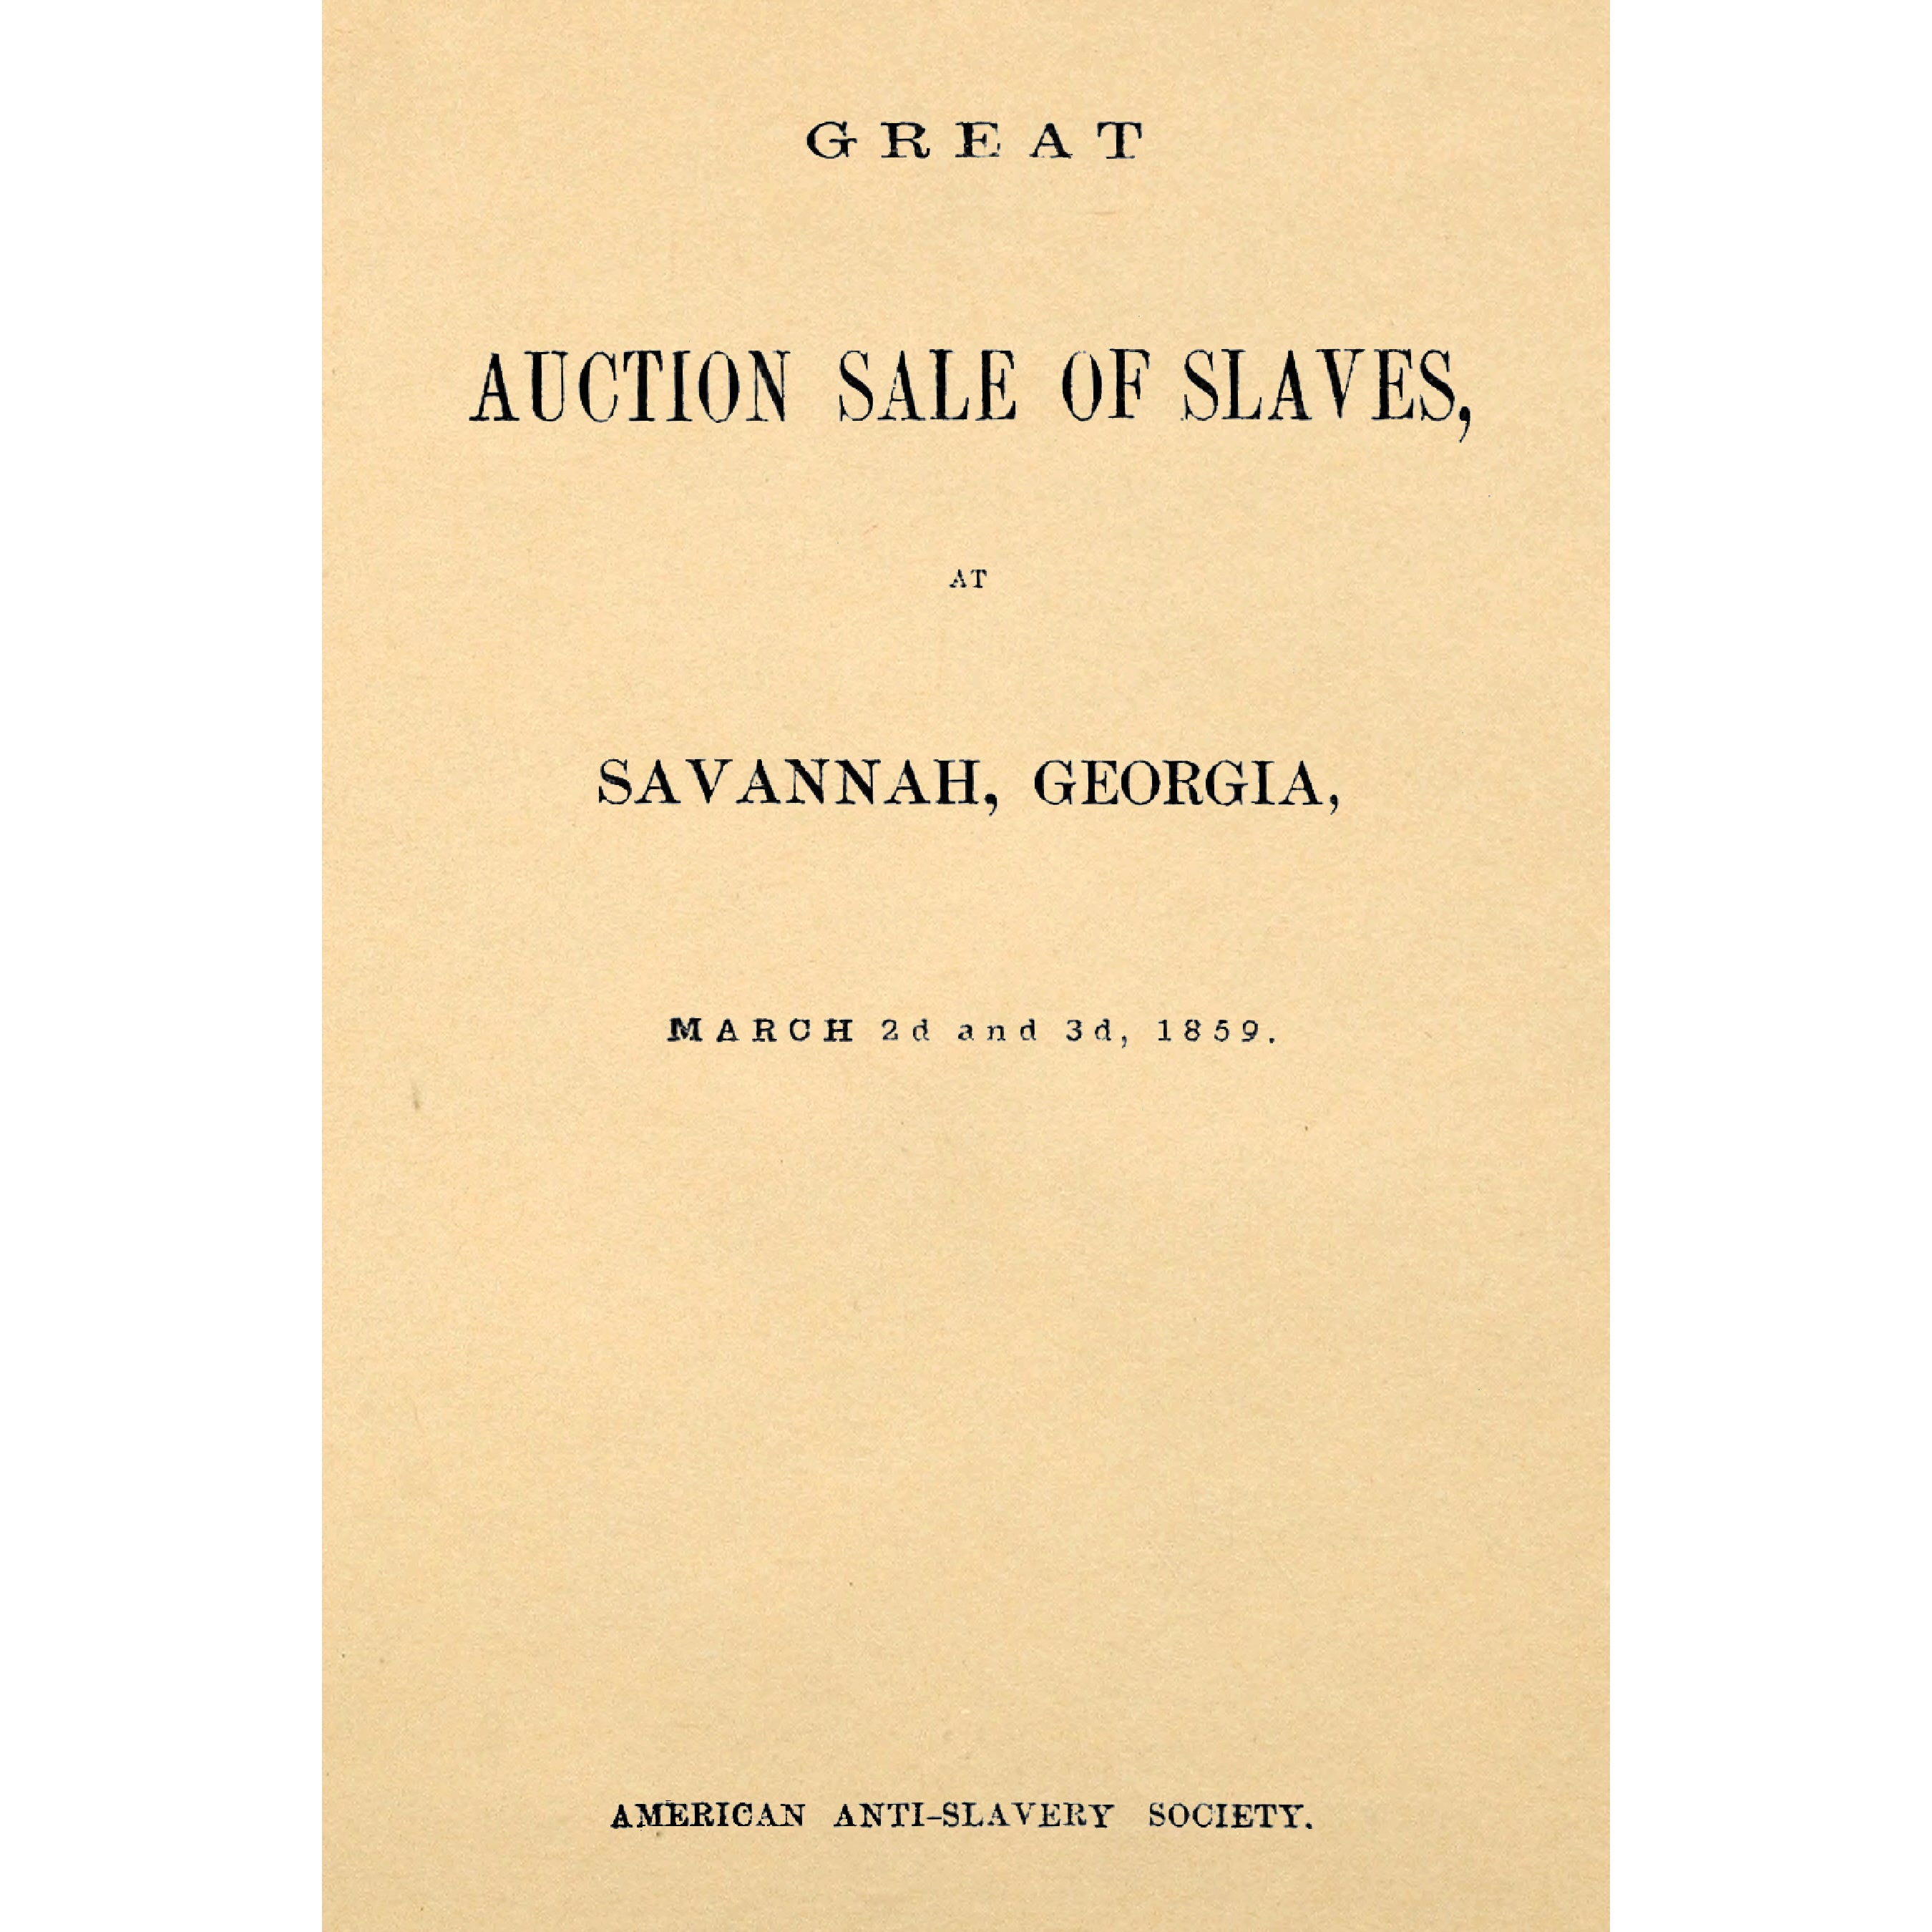 Great Auction Sale of Slaves at Savannah, Georgia, March 2d and 3d, 1859